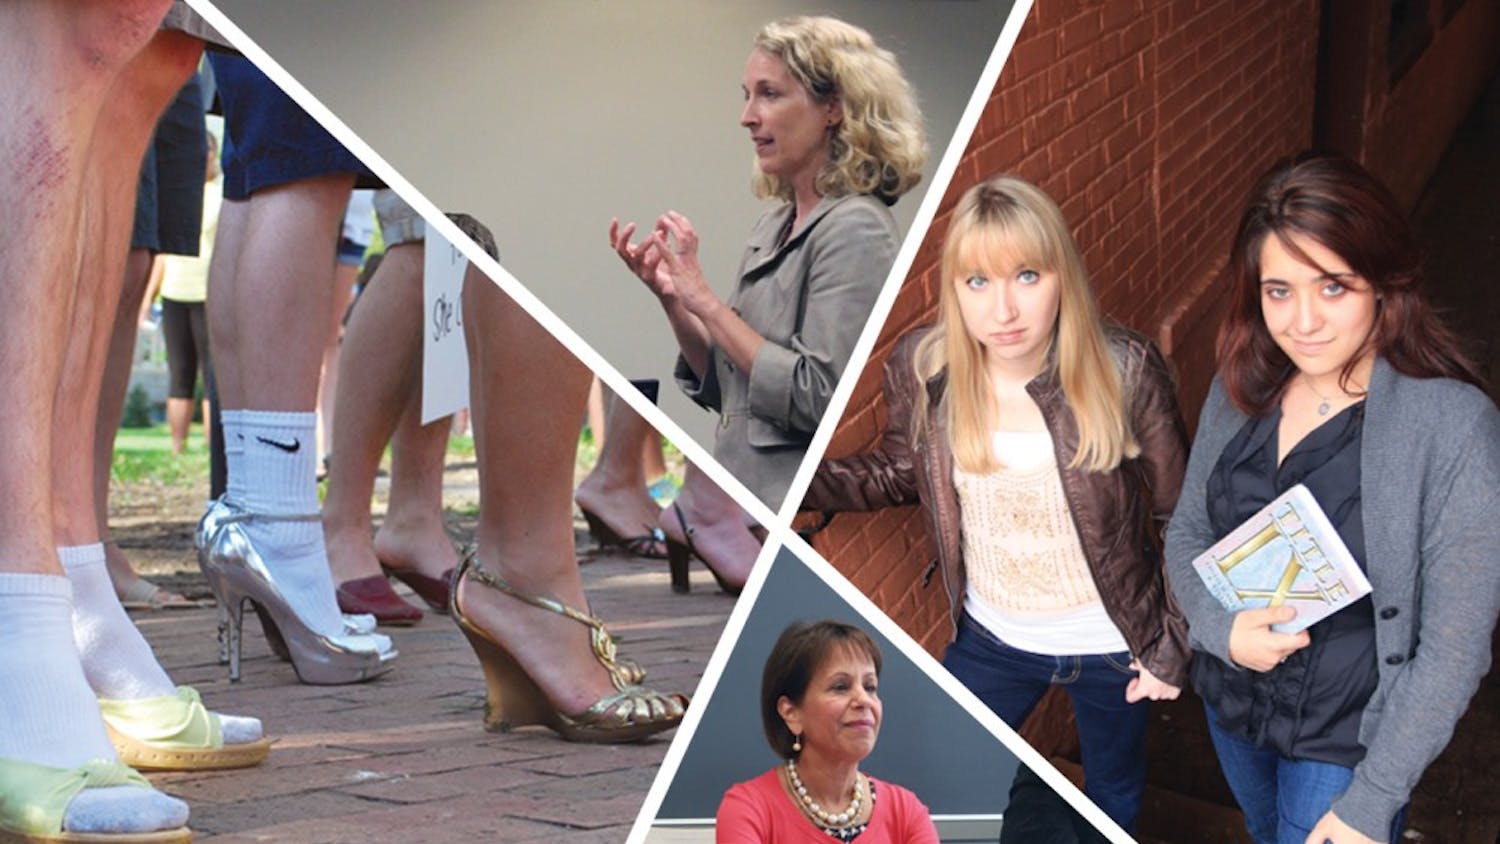 Clockwise from left: The Walk a Mile in Her Shoes event was held this spring to bring men into the conversation on sexual assault. Christi Hurt, UNC’s Sexual Assault Task Force chairwoman, speaks about policies at a meeting. Landen Gambill and Andrea Pino are among the filers of federal complaints against UNC’s handling of sexual assault. Chancellor Carol Folt approved the policy when she received it a week before classes started.